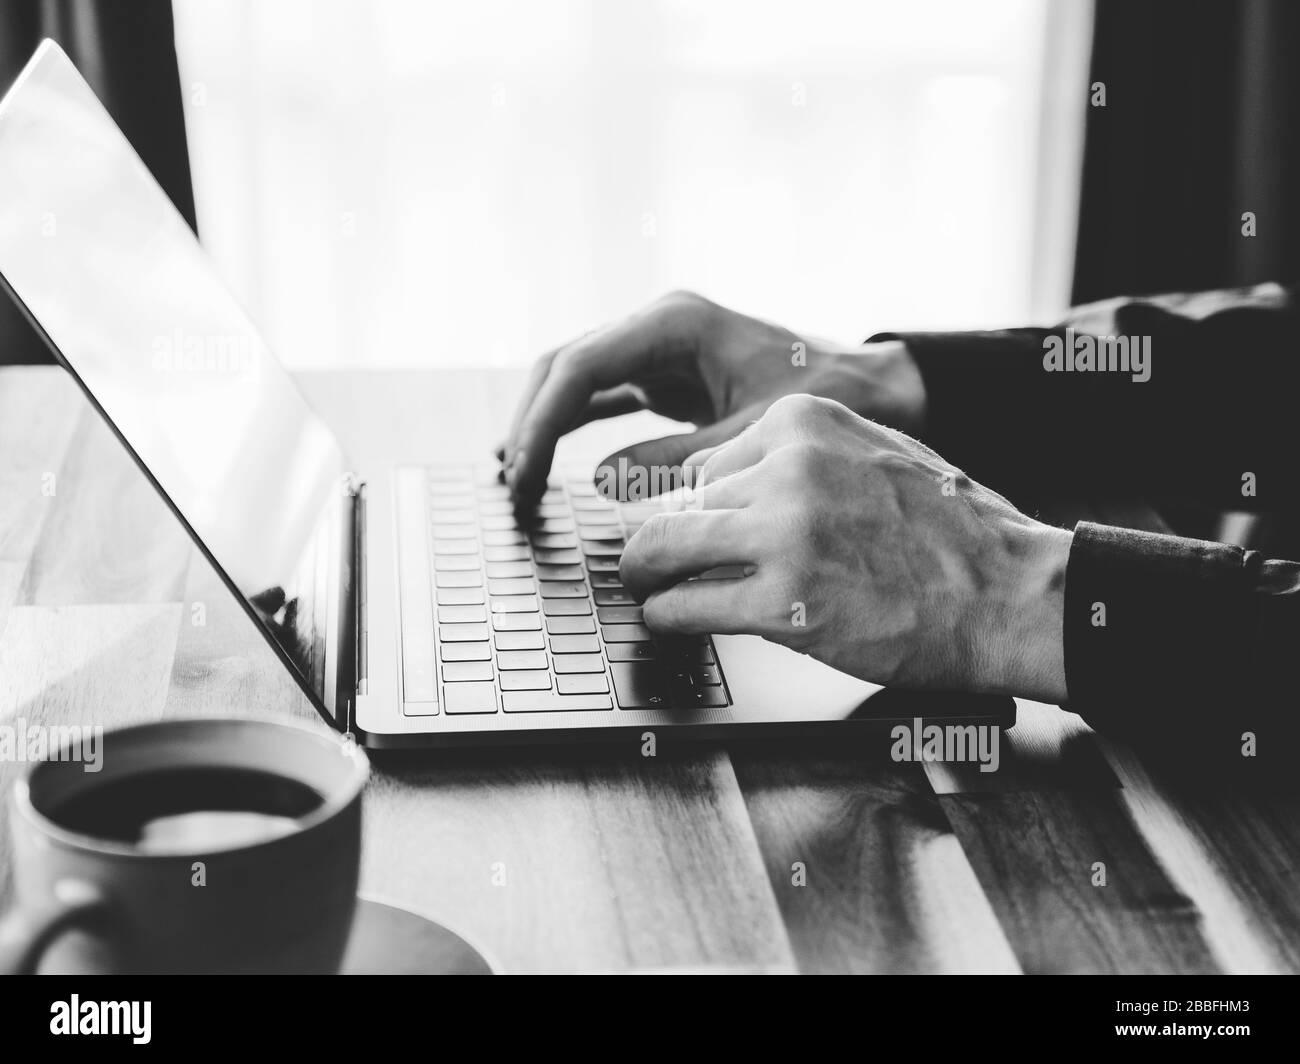 A man is typing on a laptop keyboard. Concept of work from home, black and white photo. Stock Photo